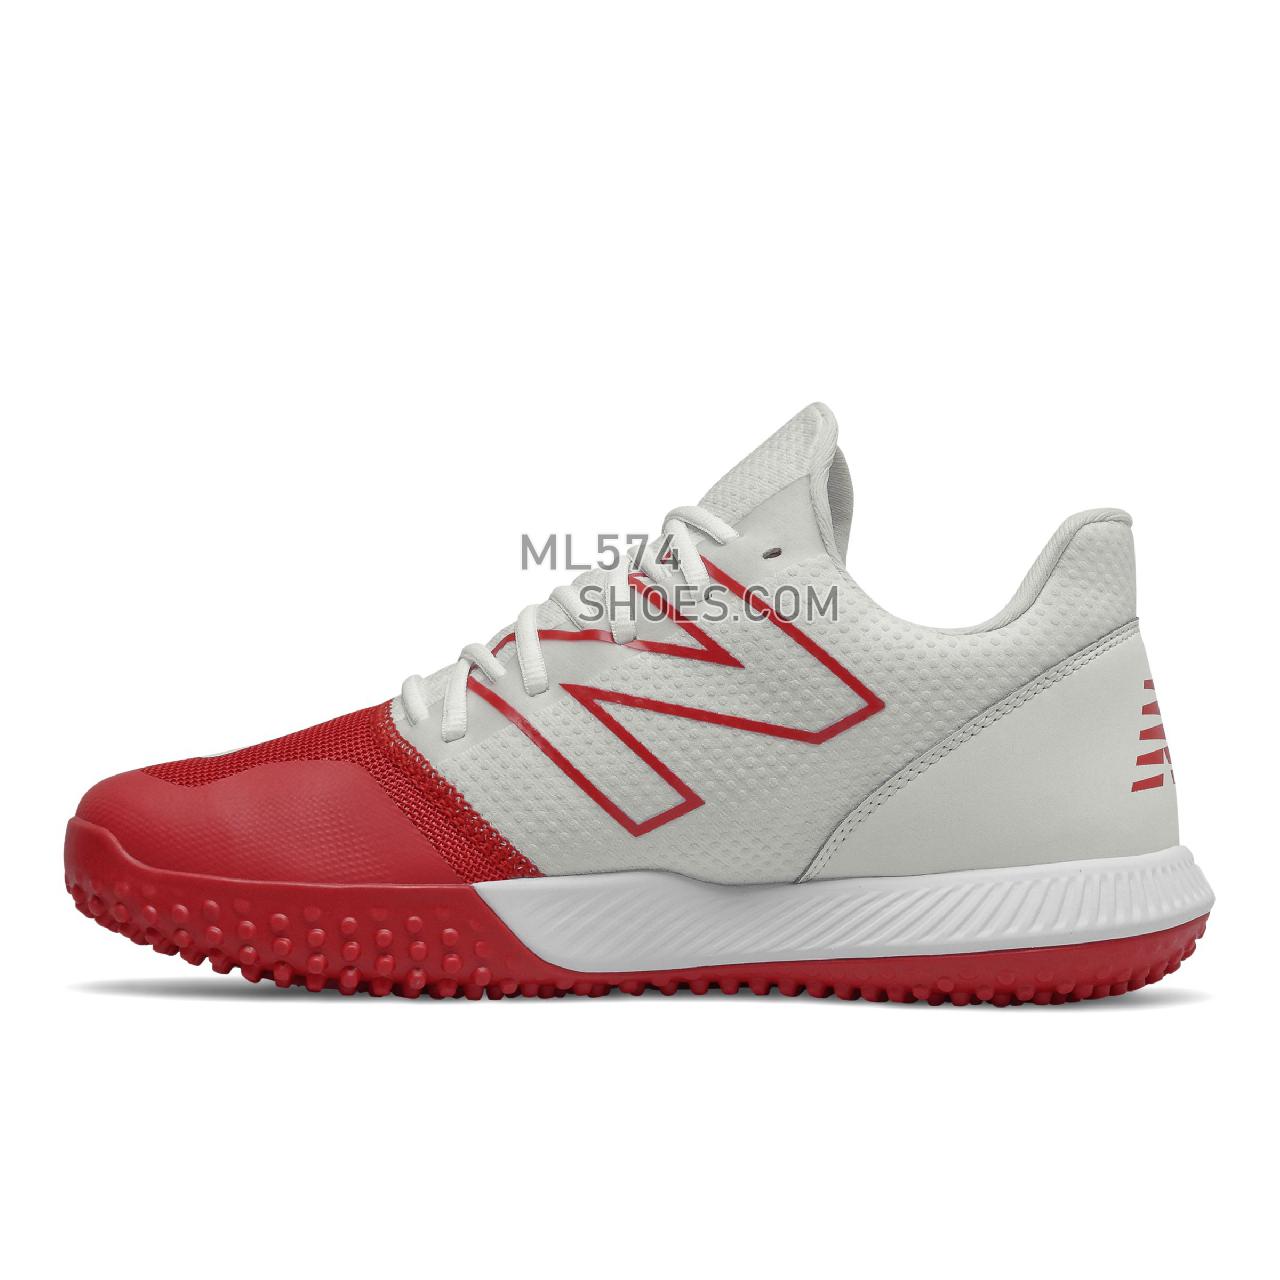 New Balance FuelCell 4040 v6 Turf Trainer - Men's Baseball Turf - Team Red with White - T4040TR6